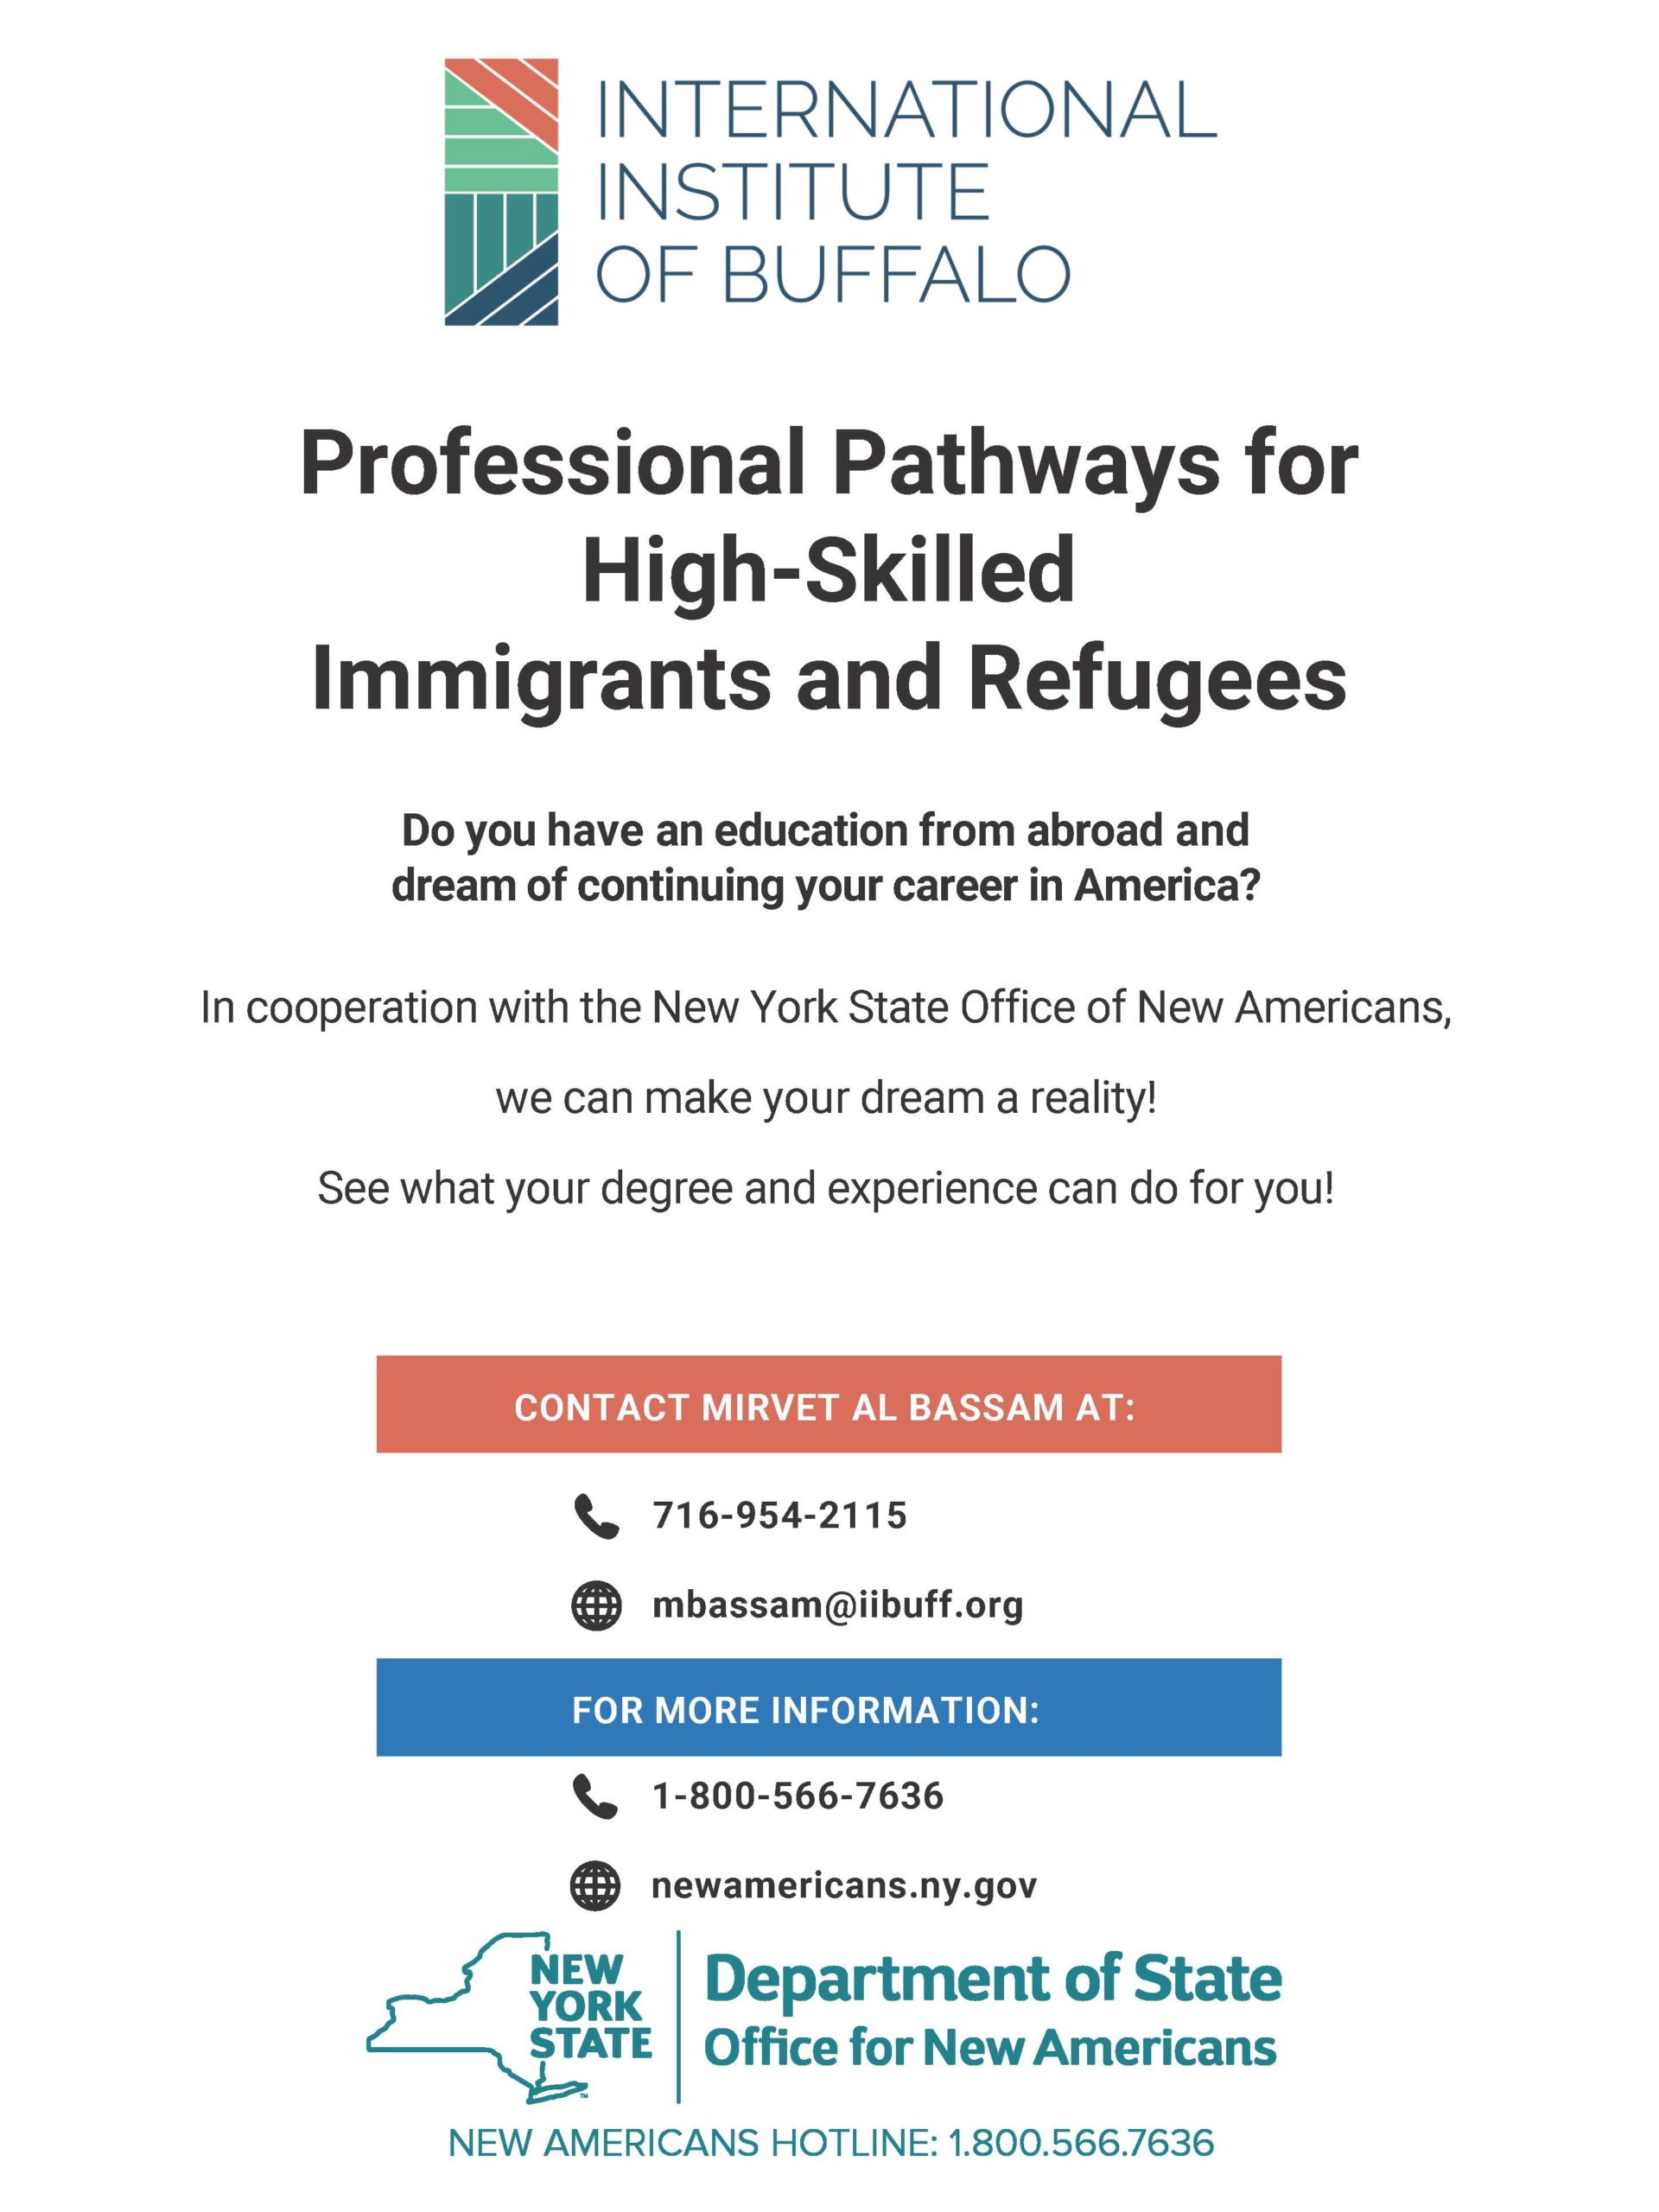 Professional Pathways for High-Skilled Immigrants and Refugees, Do you have an education from abroad and dream of continuing your career in America? In cooperation with the NYS Office of New Americans, we can make your dream a reality! See what your degree and experience can do for you! CONTACT MIRVET AL BASSAM AT 716-954-2115